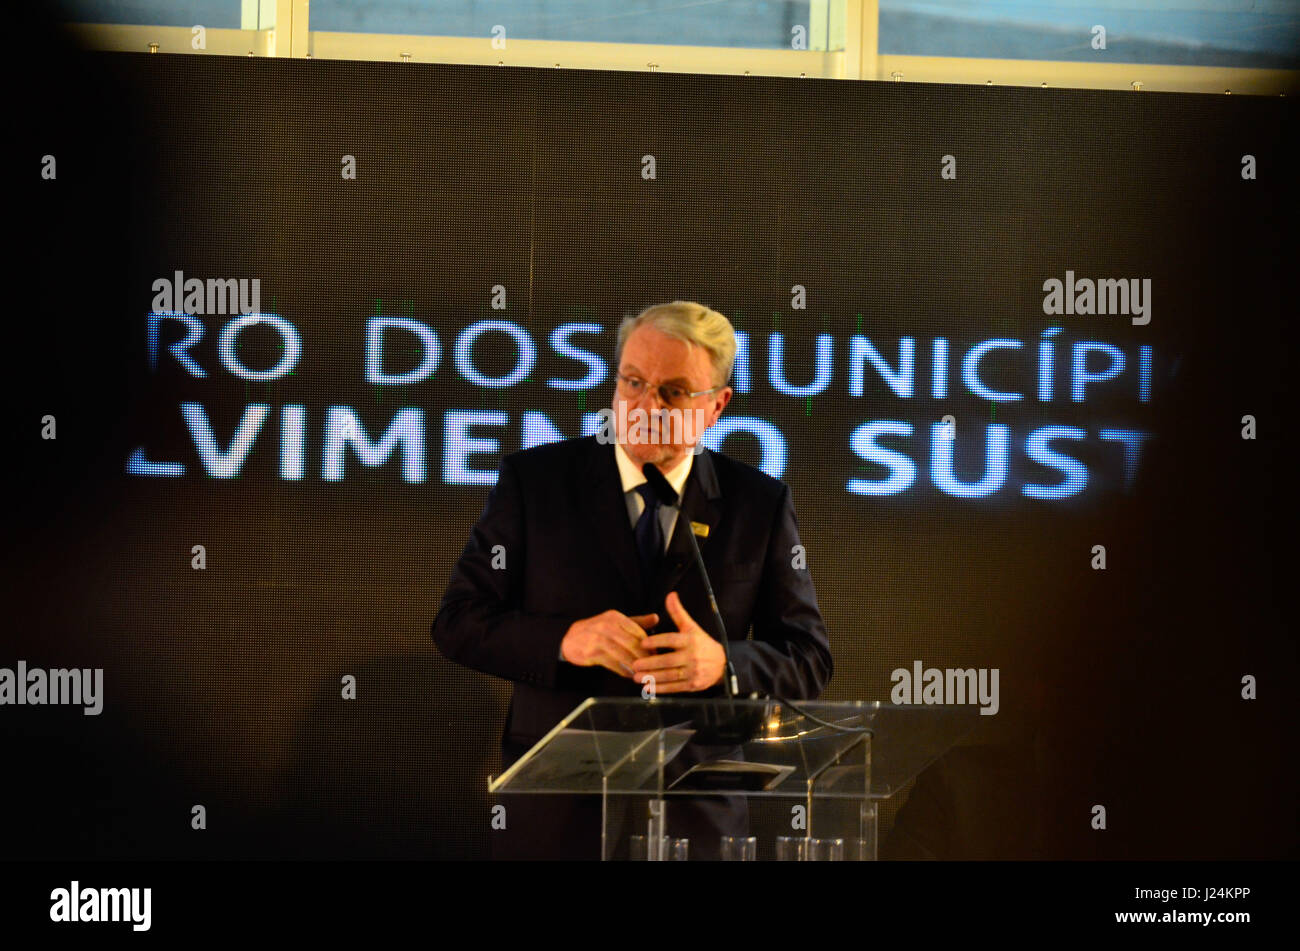 BRASÍLIA, DF - 25.04.2017: SOLENIDADE DE ABERTURA DO IV EMDS - Marcio Lacerda (mayor of Belo Horizonte / MG and chairman of the FNP), during the opening ceremony of the IV Meeting of Municipalities with Sustainable Development on Tuesday (25). The event brings together companies, authorities, political personalities from Brazil and the European Union on the premises of the National Mané Garrincha Stadium in Brasilia - DF. (Photo: Demétrius Abrahão/Fotoarena) Stock Photo